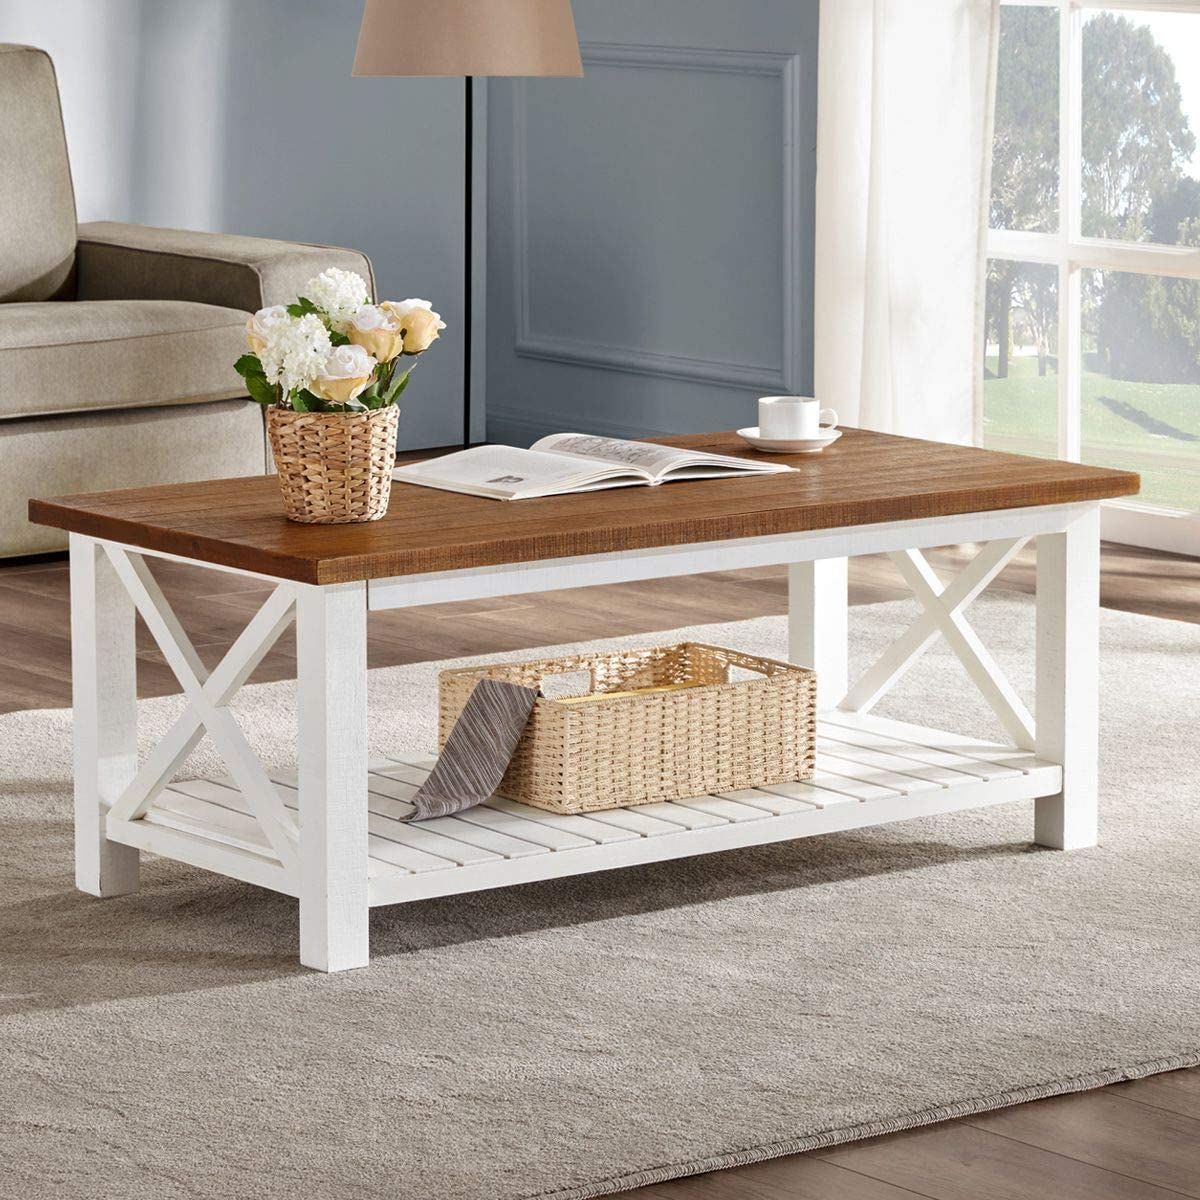 The 10 Best Farmhouse Coffee Tables (for Any Budget) With Regard To Living Room Farmhouse Coffee Tables (View 2 of 20)